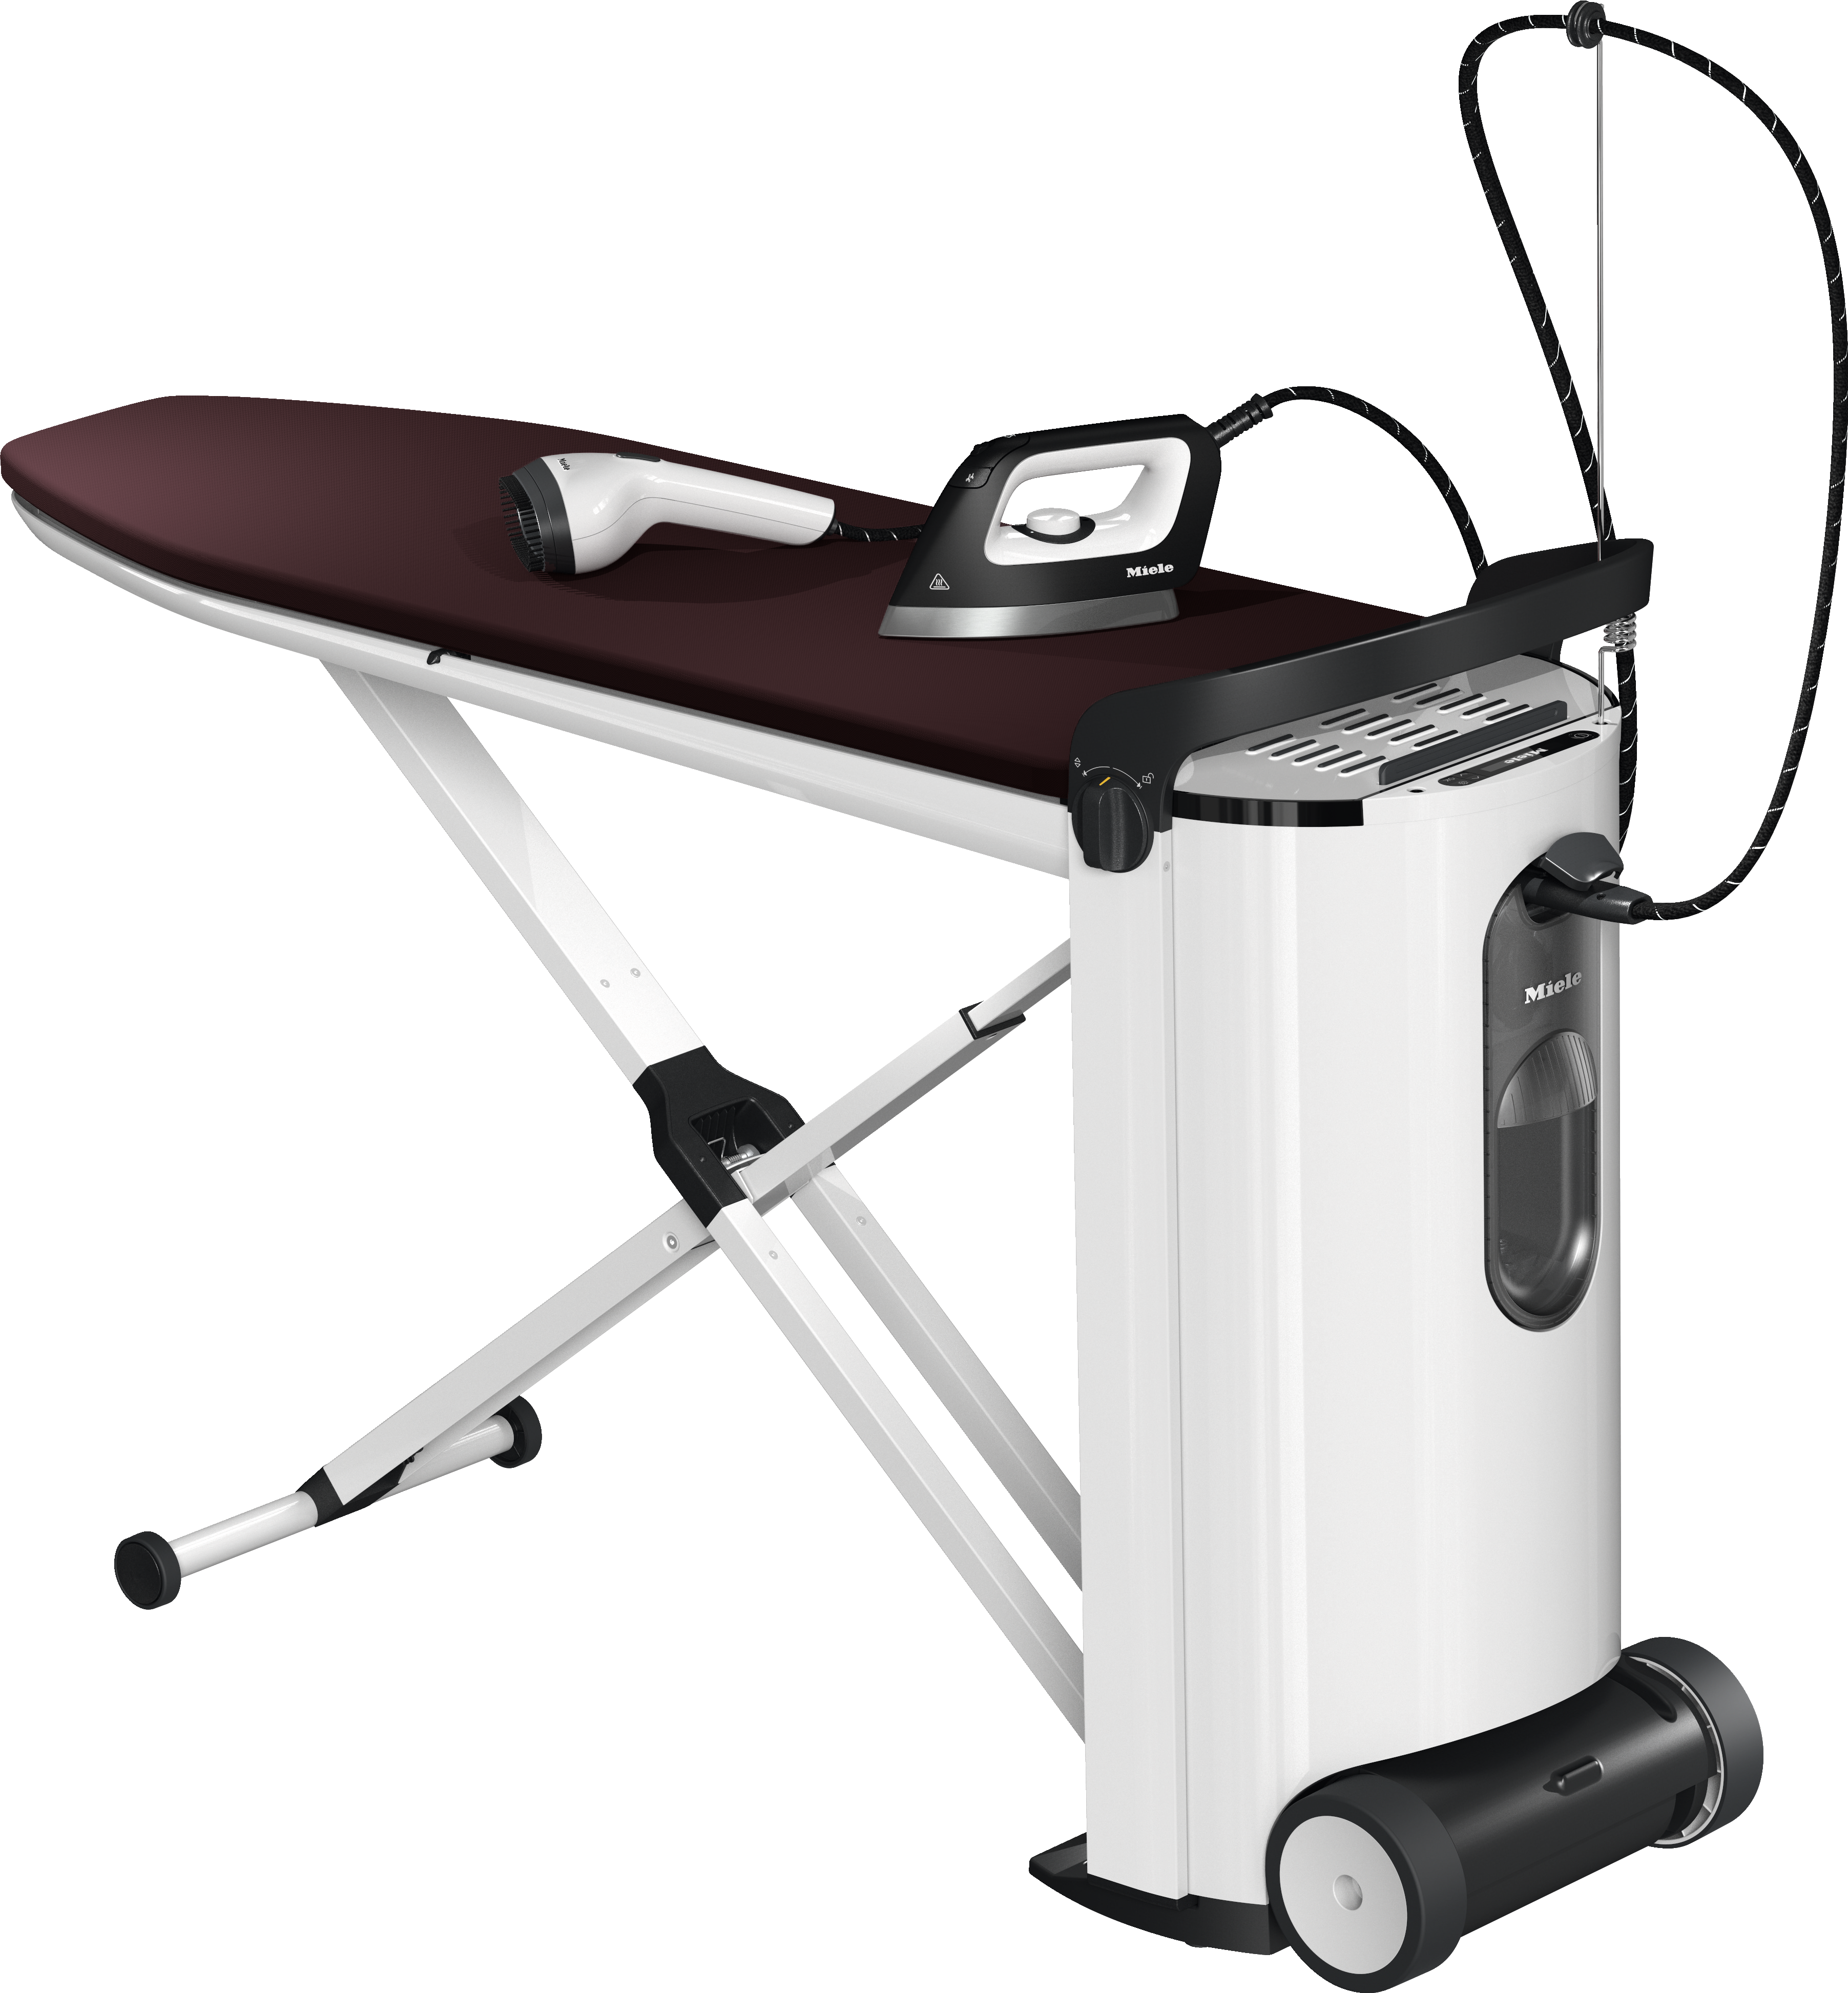 B 4847 FashionMasterSteam ironing system with display and steamer for perfect ironing results and convenience.